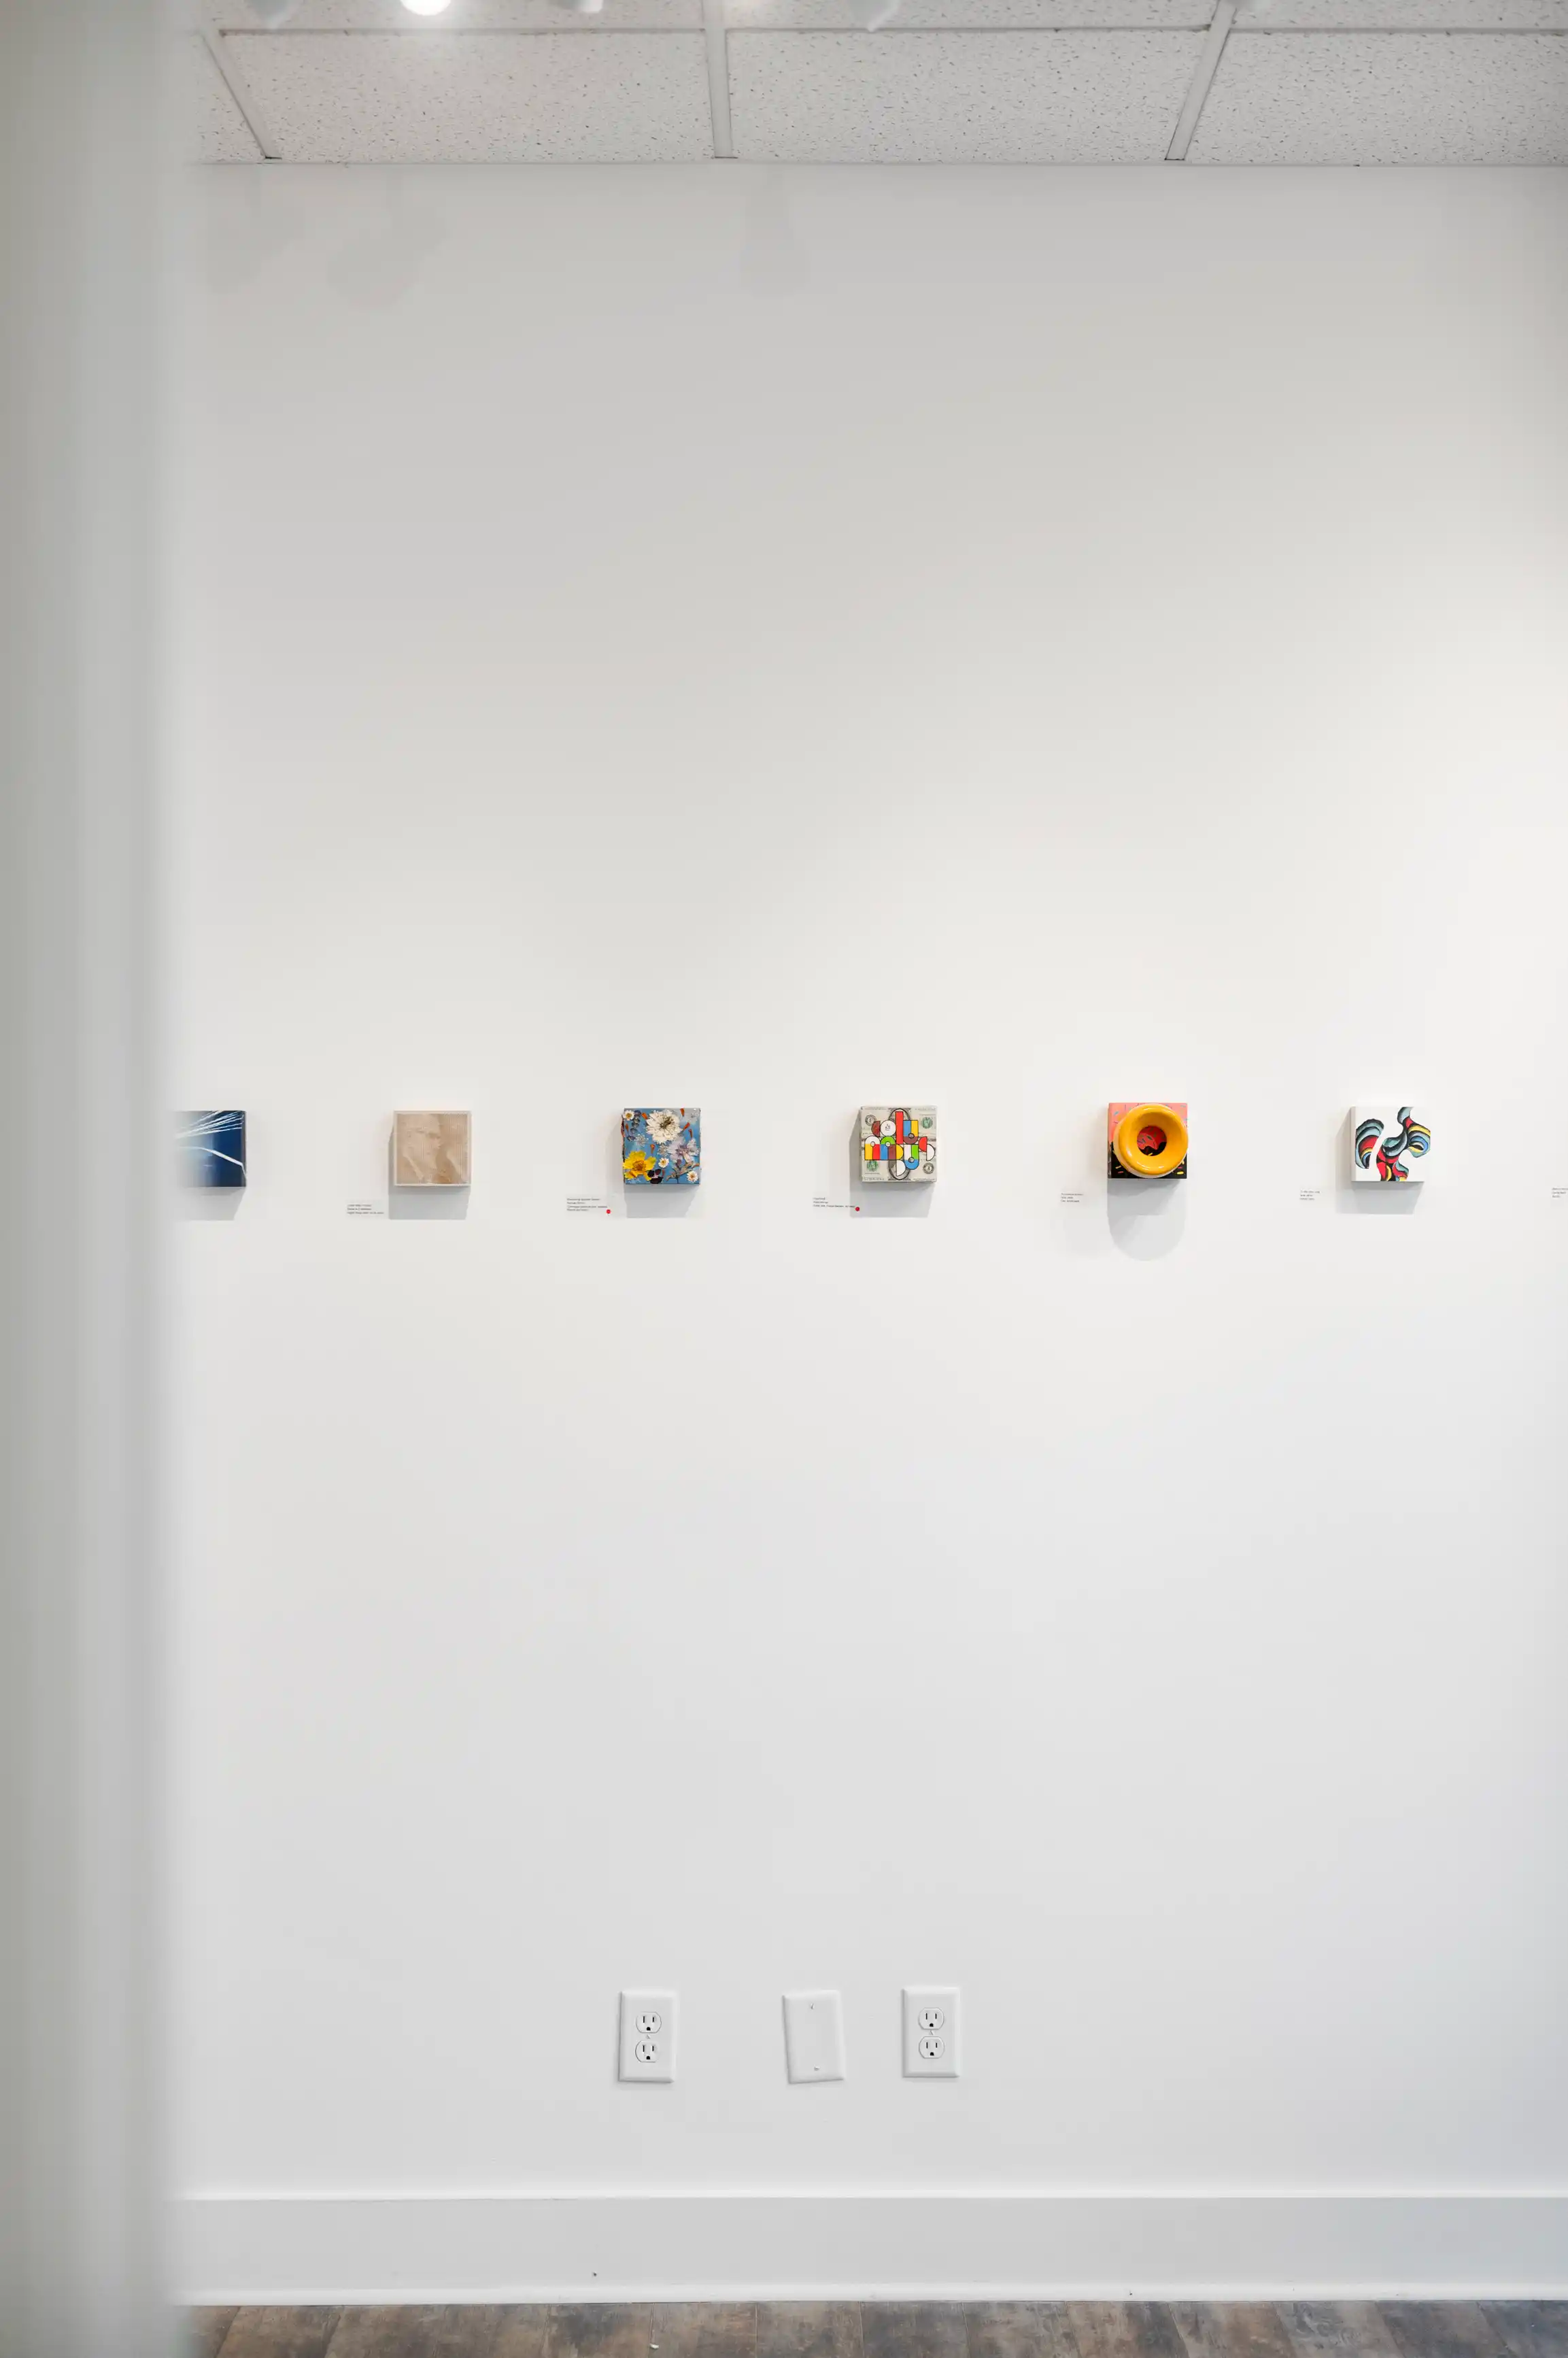 Art exhibition wall with a series of small, varied paintings lit by ceiling lights in a clean, white interior space.